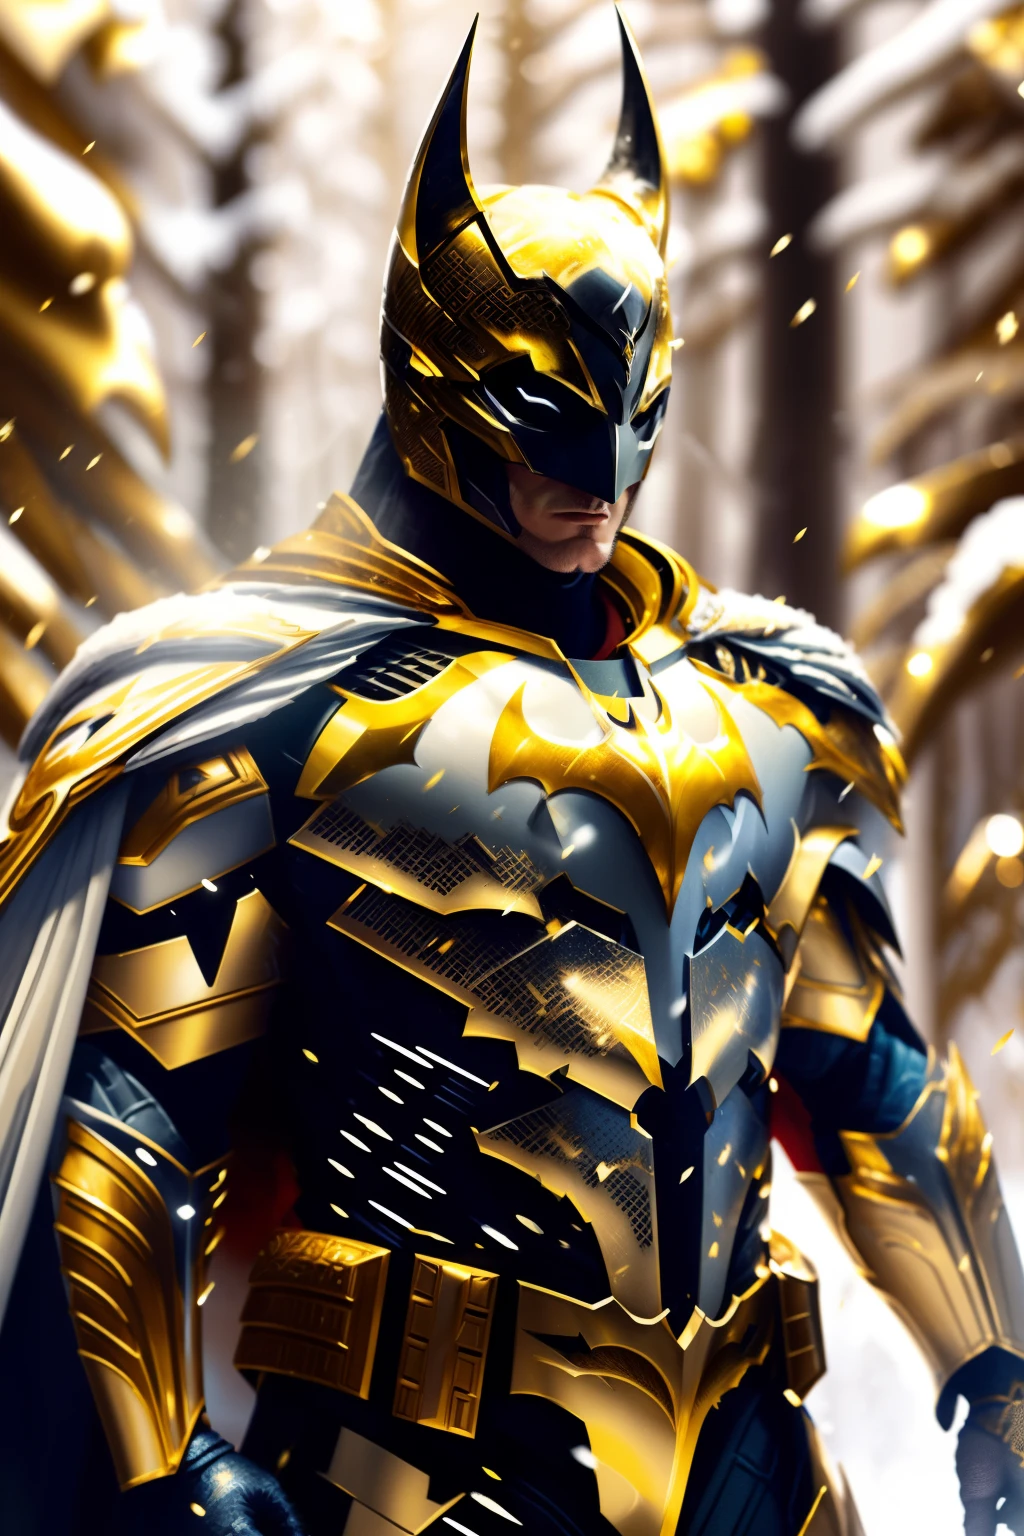 Batman full body on a white, gold and red armor suit, on a white snow forest, snow falling over the armor, the sin shines over the armor suit, hyper realistic, photorealistic, intricate fabric details, needlepoint vining elements, photo realism, 24k resolution, hyper detail art style on Leonardo Da Vinci  an award winning photo